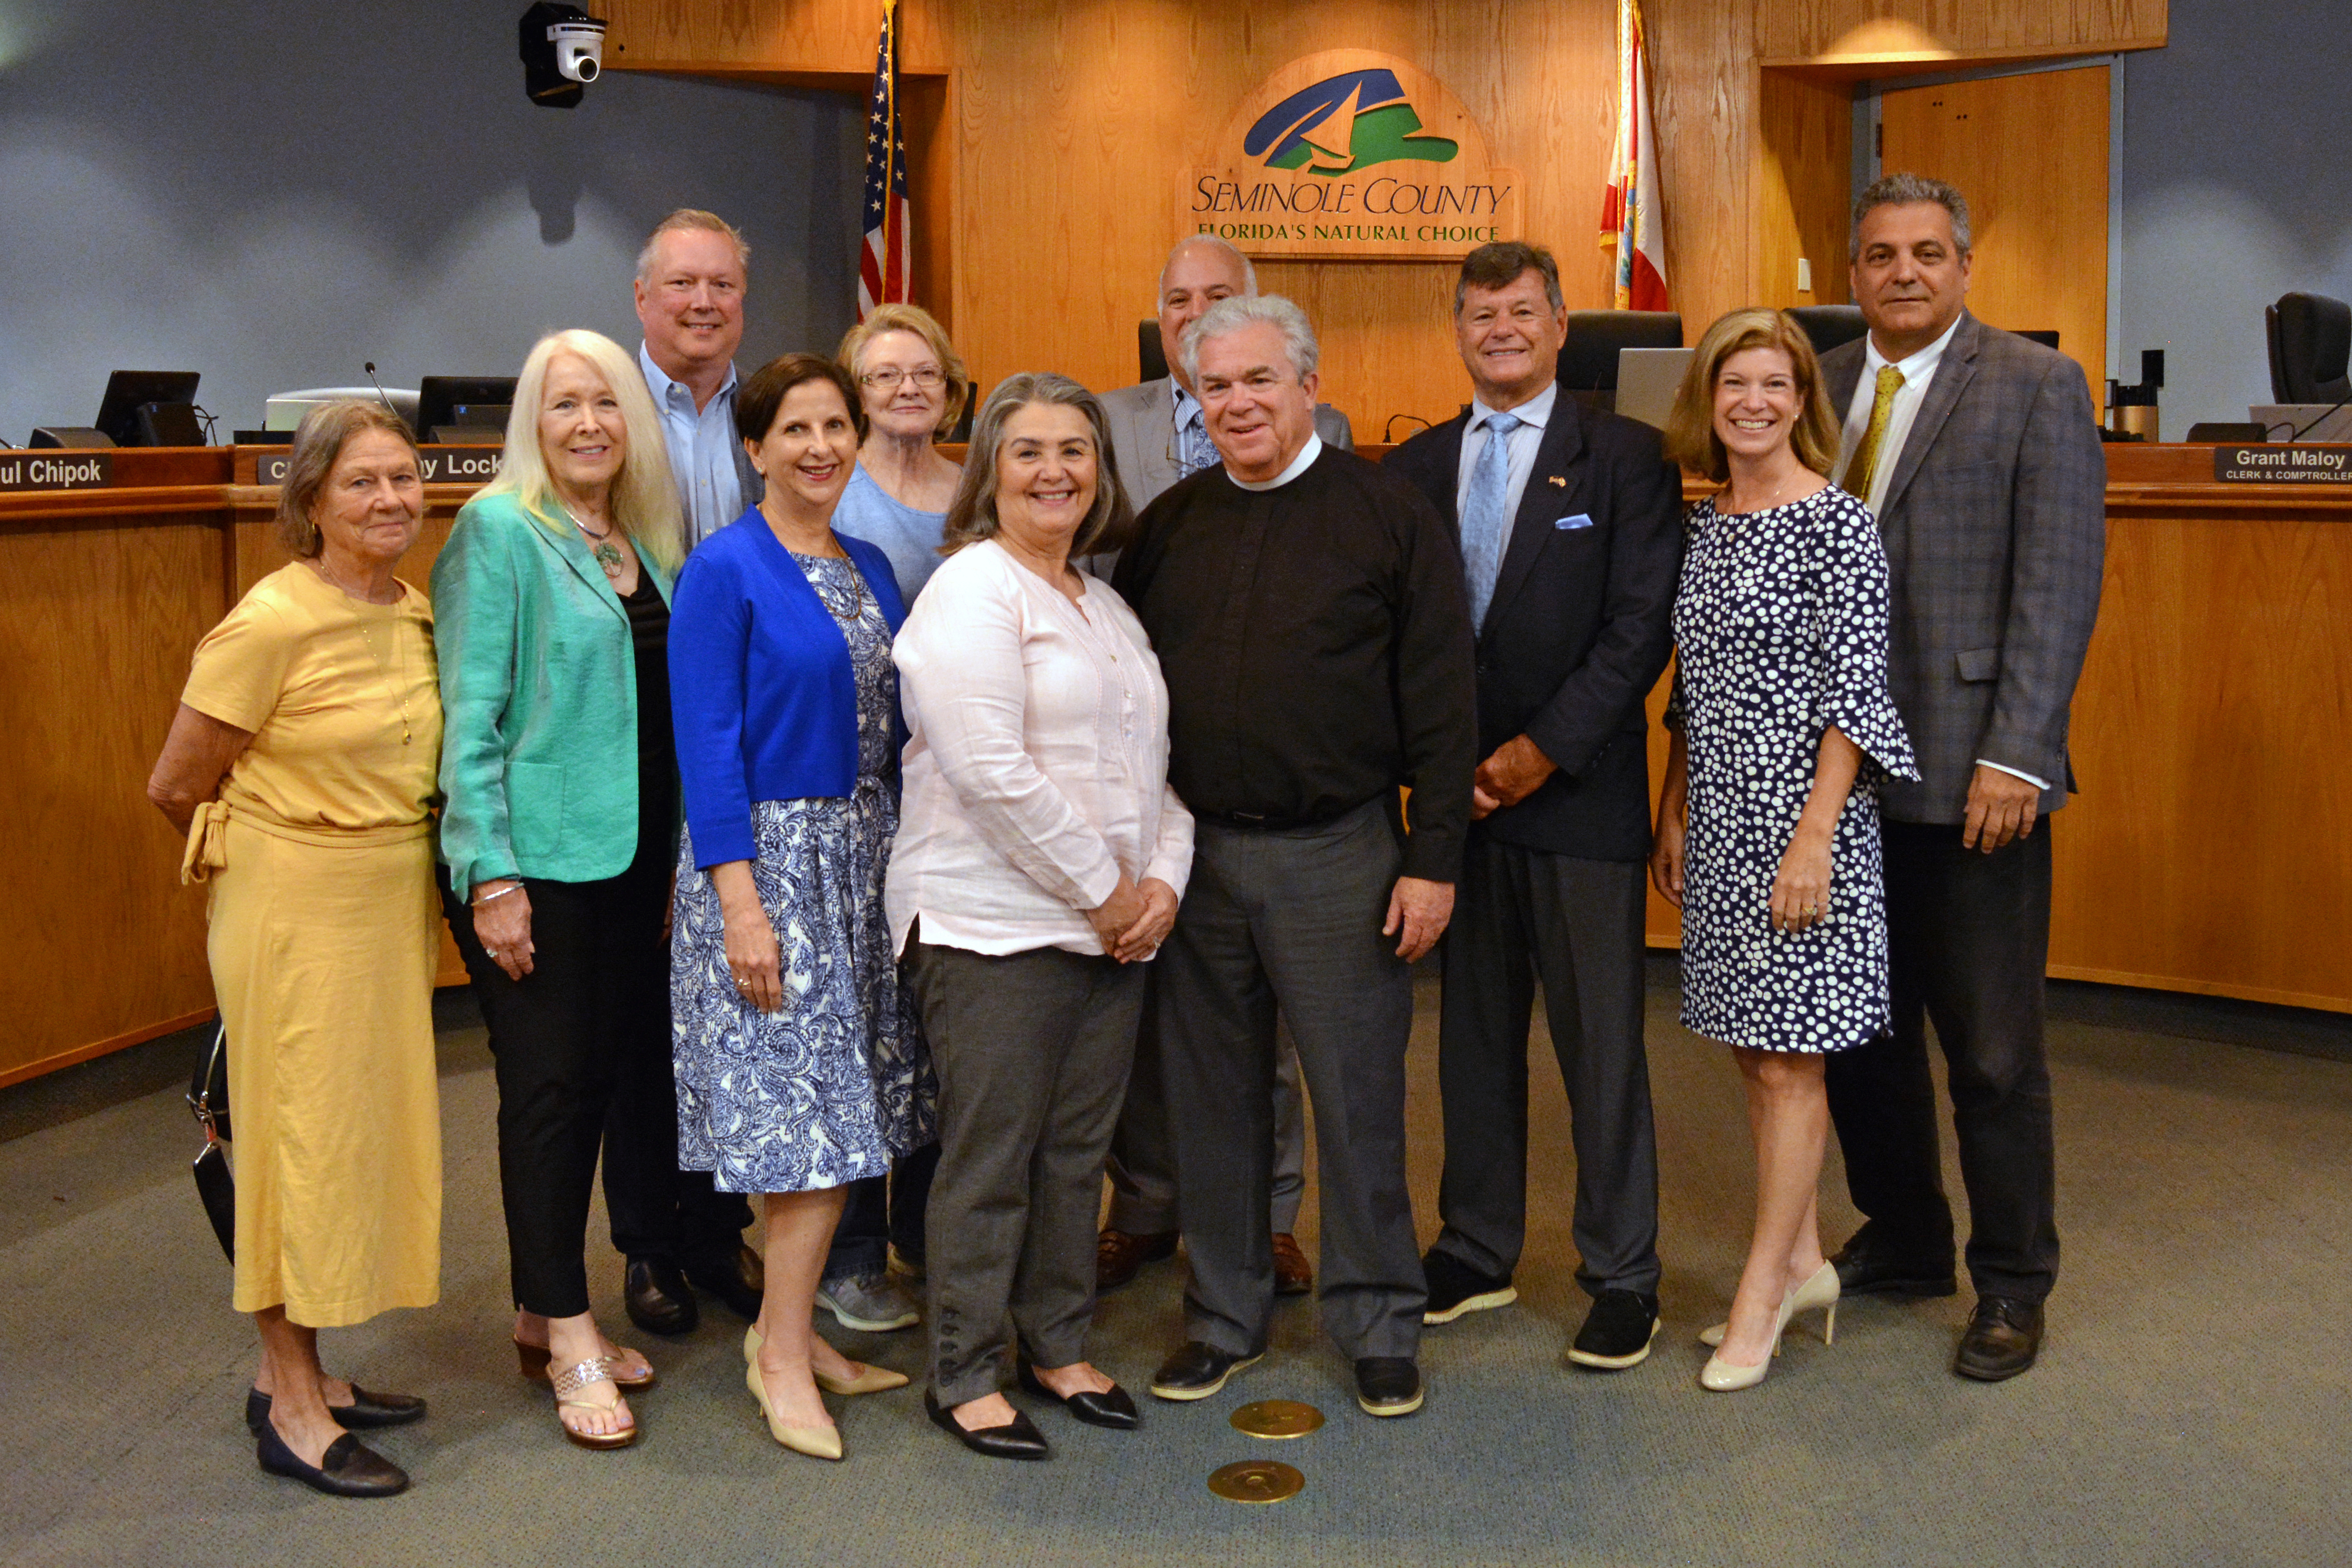 Resolution - Recognizing the 150th Anniversary of Holy Cross Episcopal Church, in Sanford Florida (Father Dan Smith)  